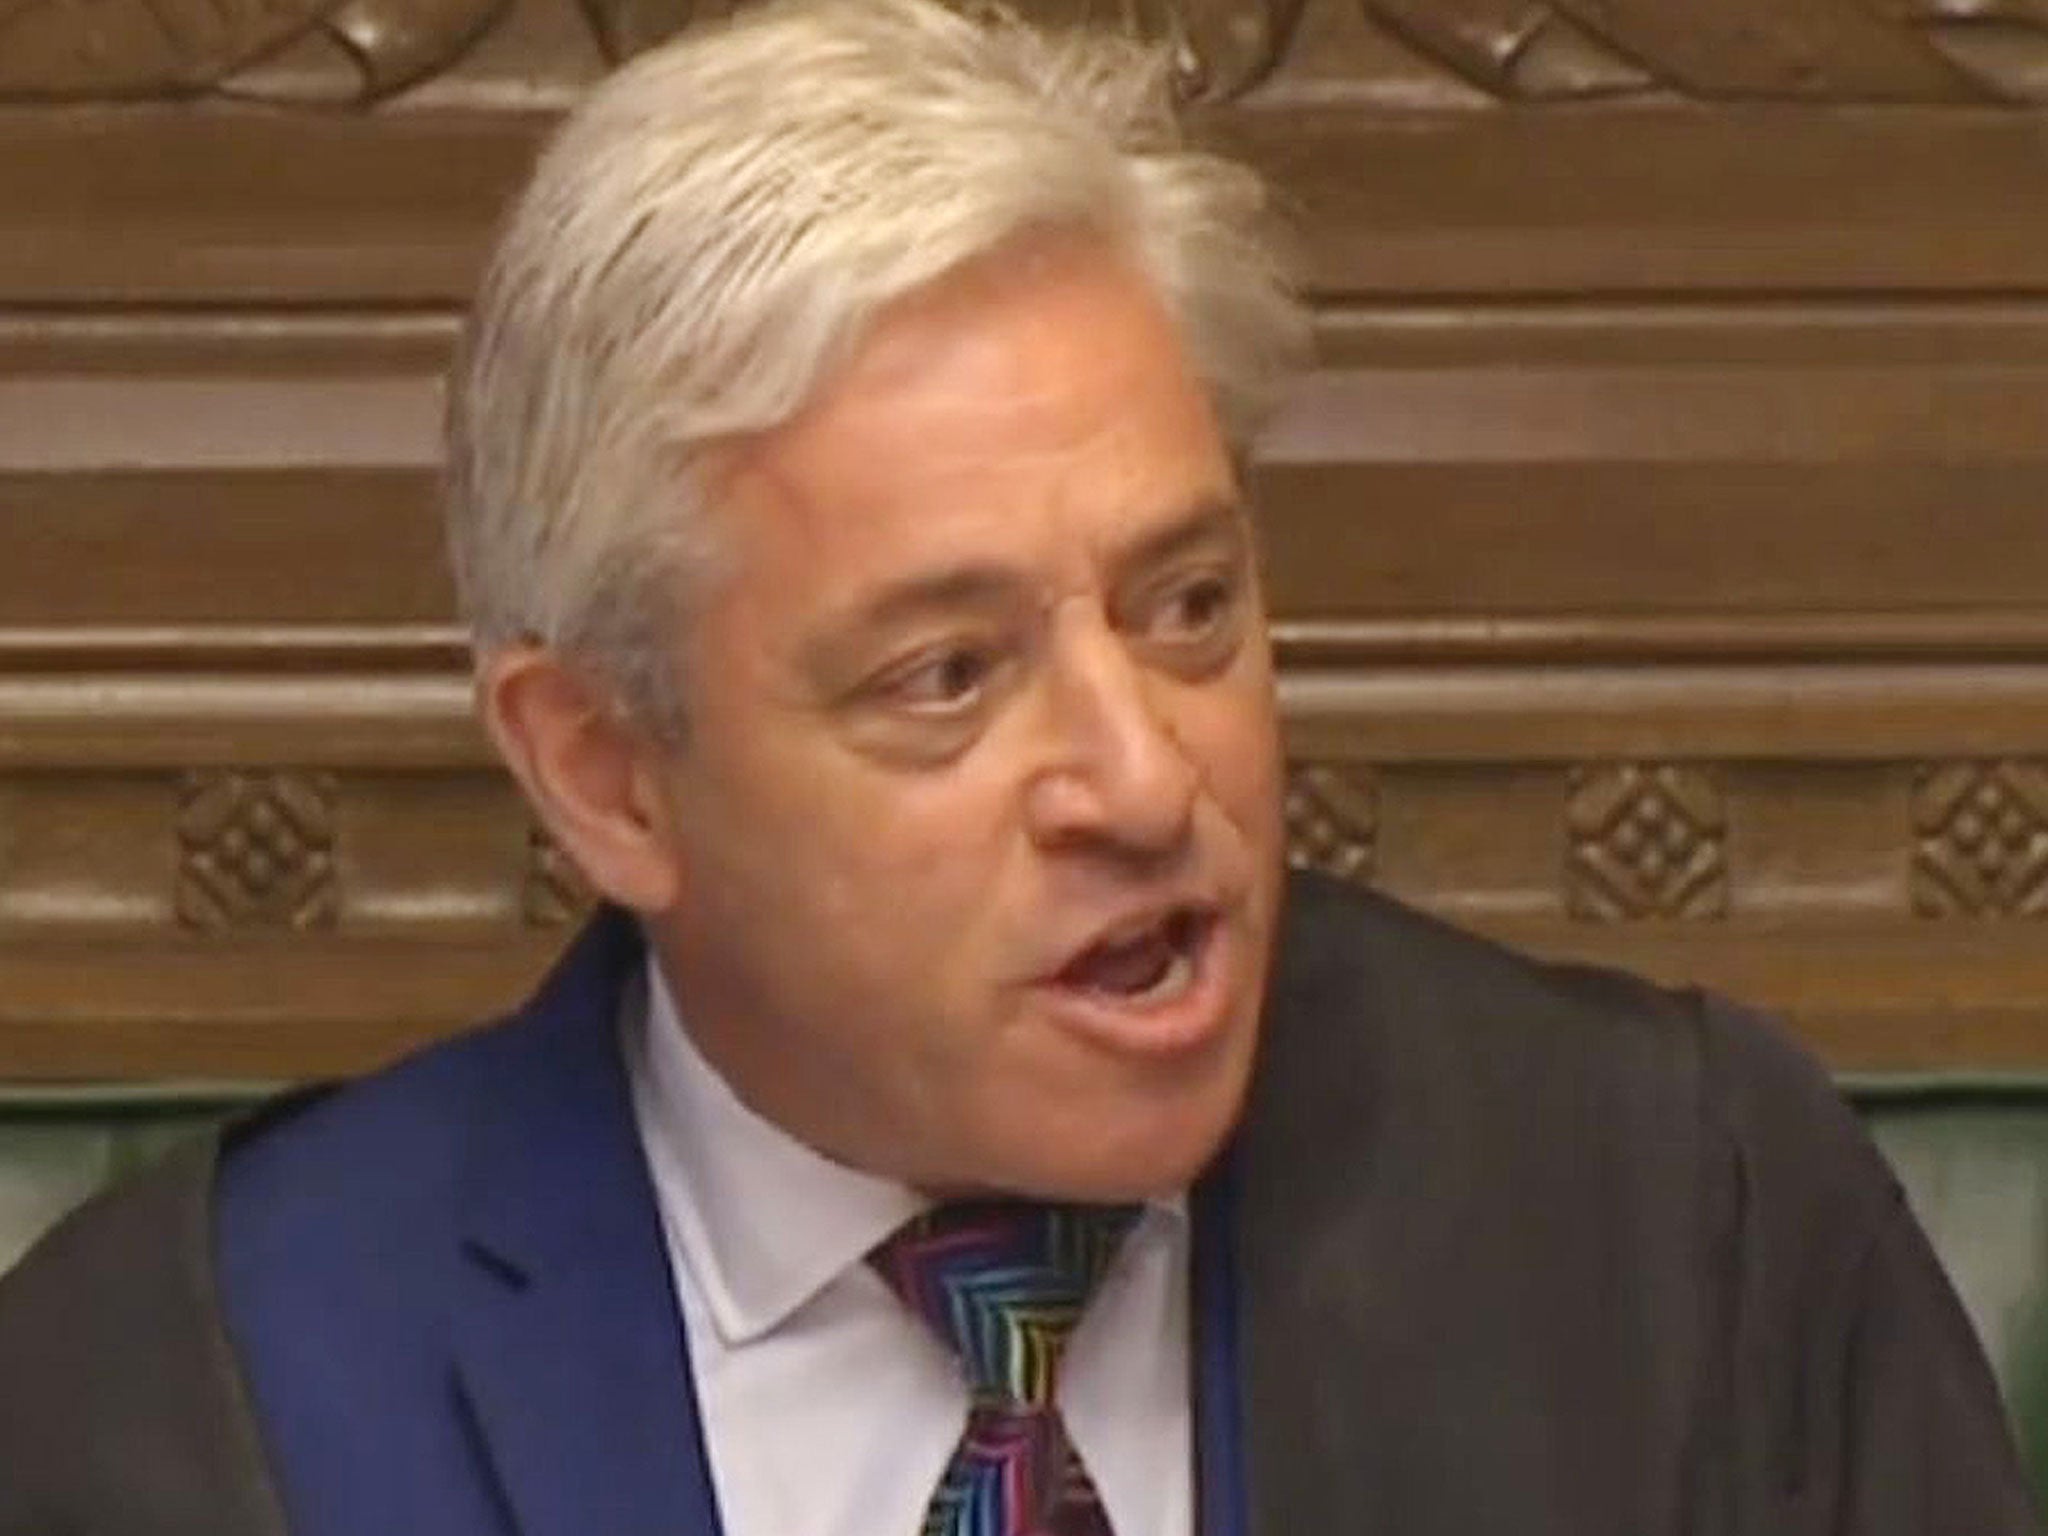 Speaker John Bercow addressed press stories about him in the Commons